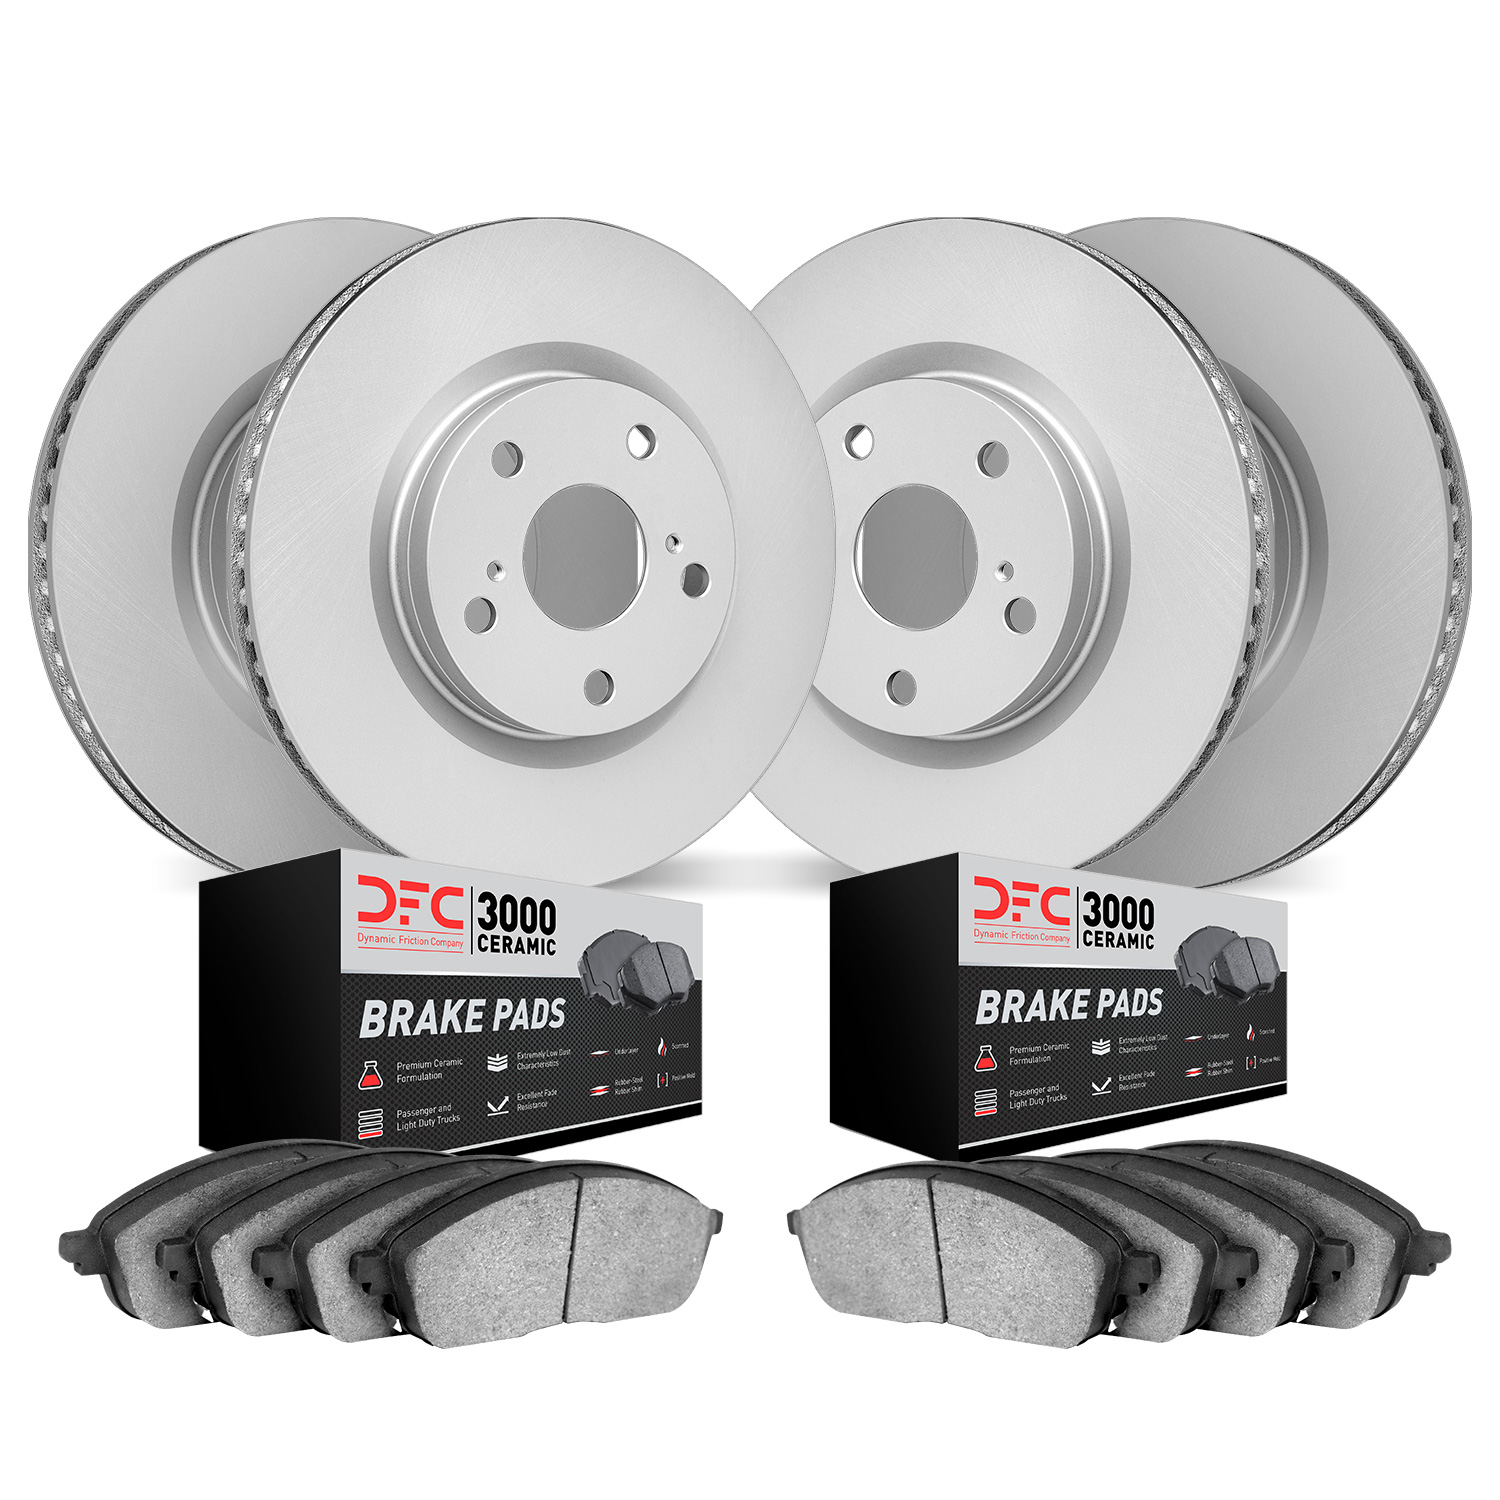 4304-31047 Geospec Brake Rotors with 3000-Series Ceramic Brake Pads Kit, 2007-2015 BMW, Position: Front and Rear